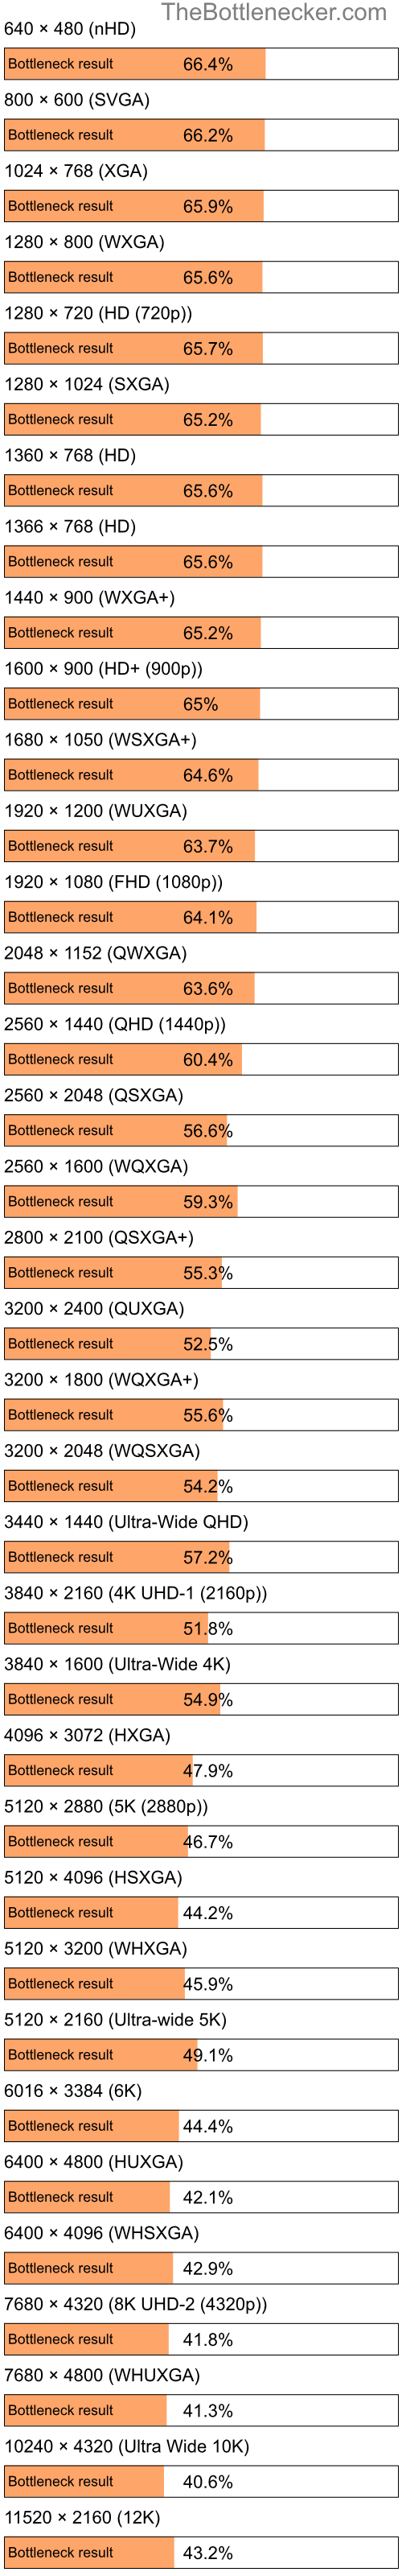 Bottleneck results by resolution for Intel Core i7-3770 and NVIDIA GeForce RTX 4080 in General Tasks